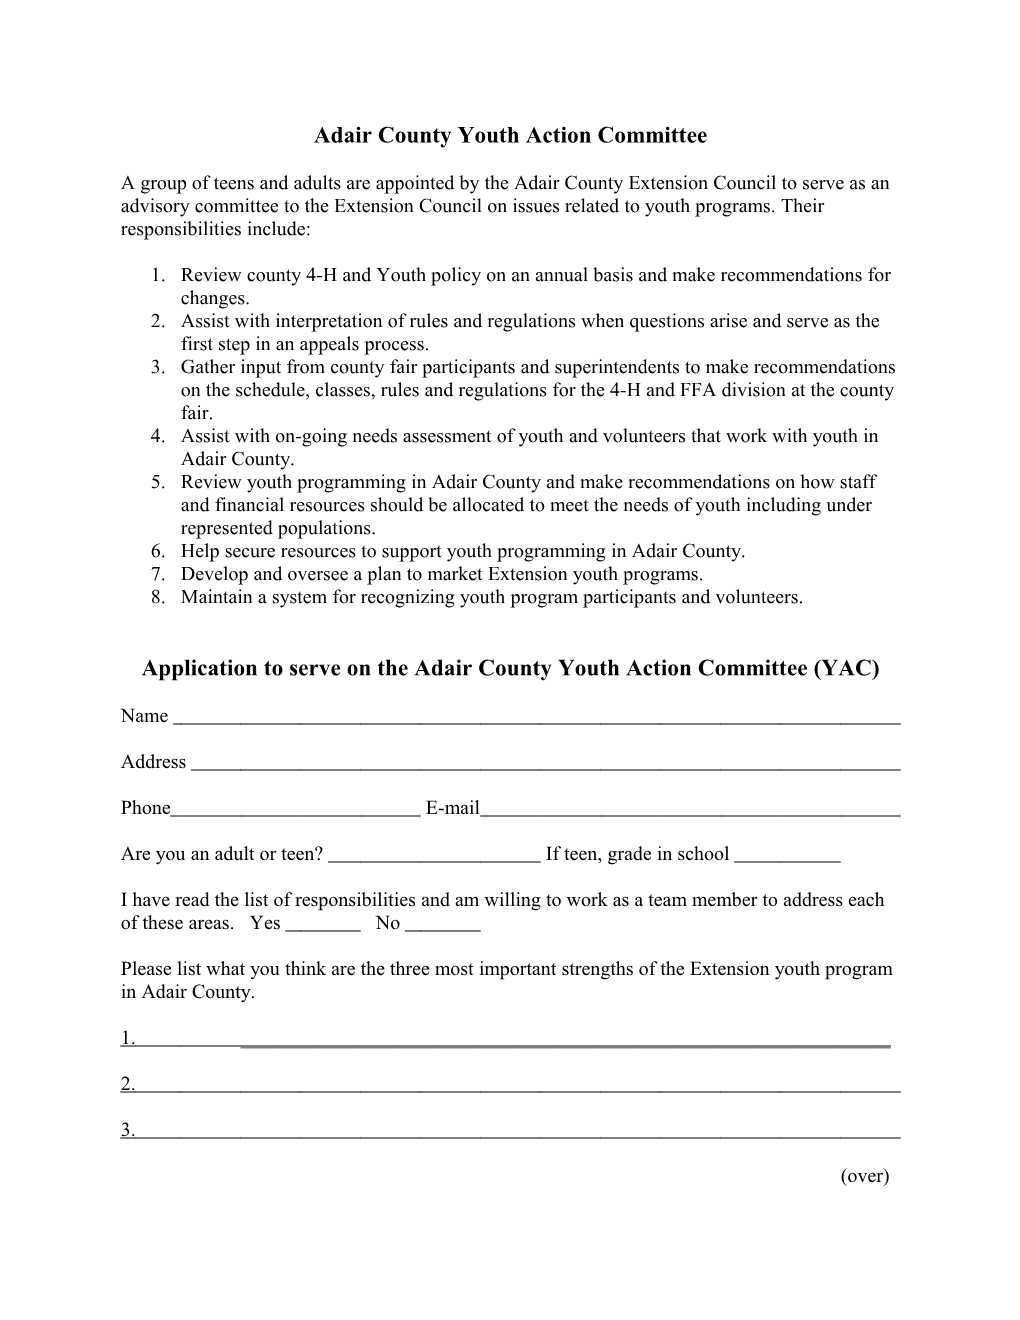 Adair County Youth Action Committee